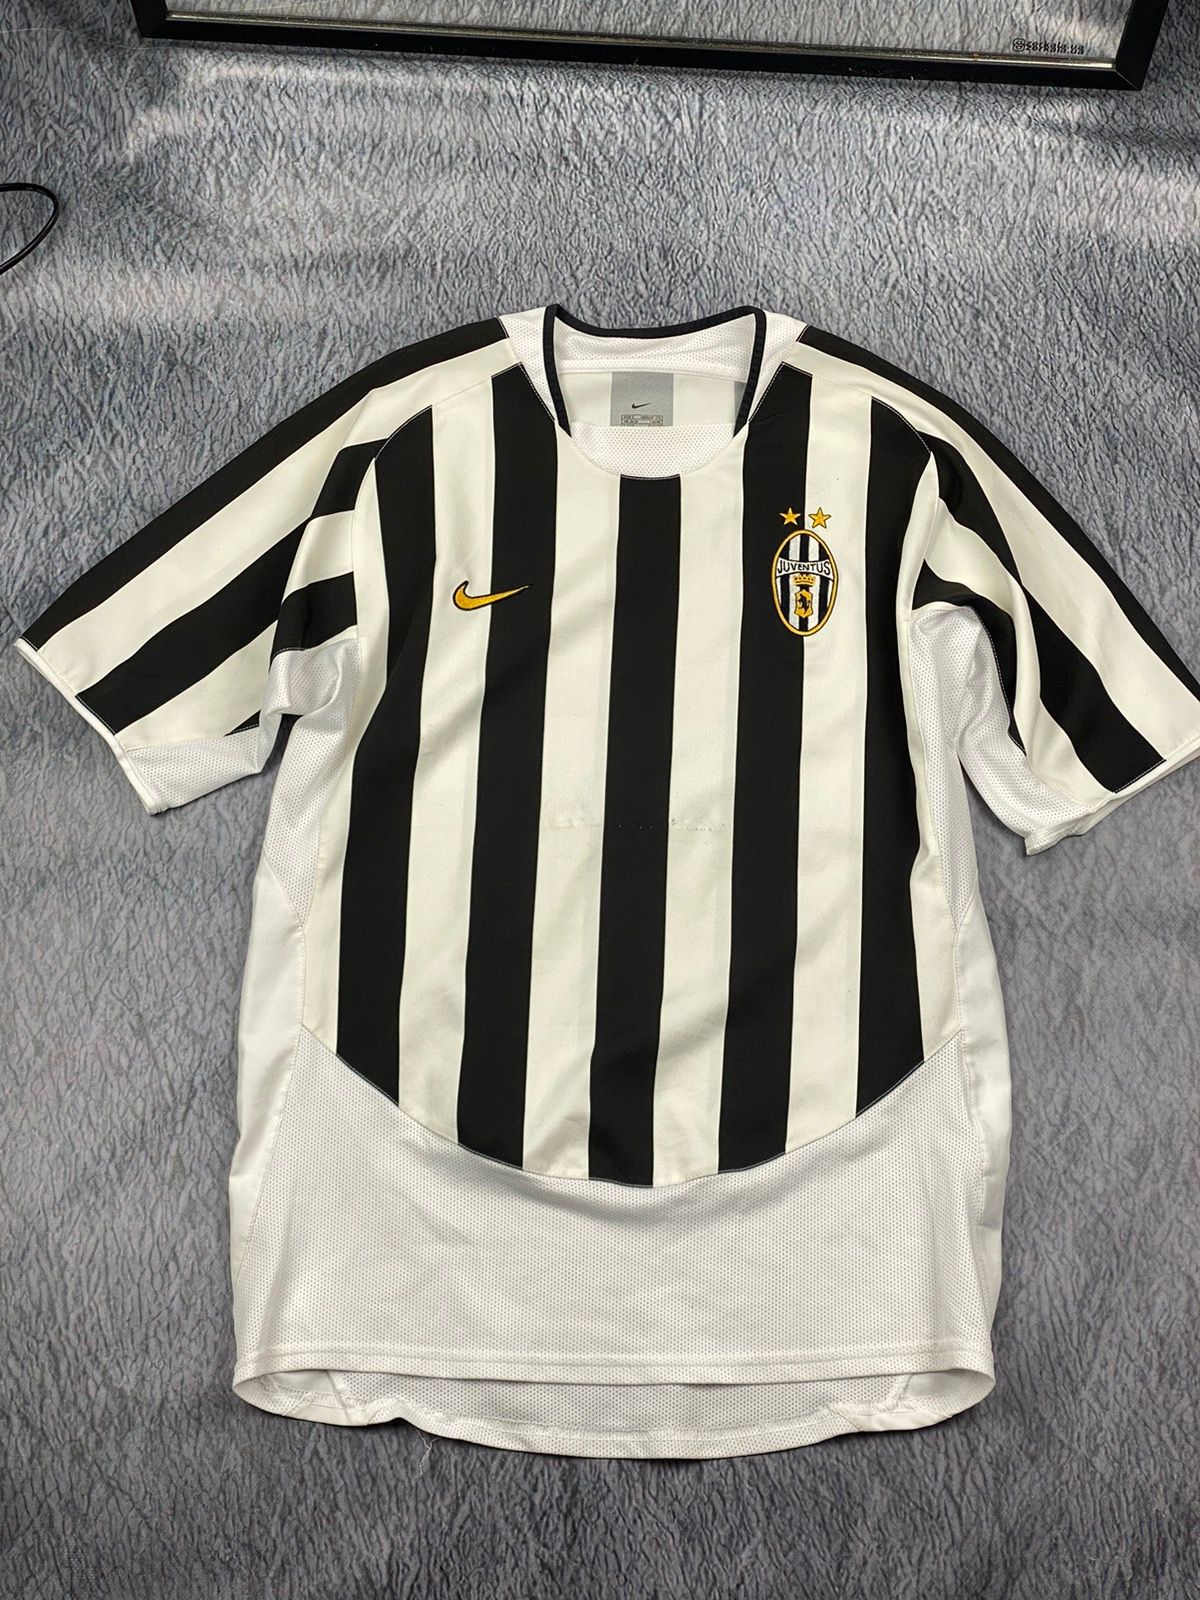 Pre-owned Jersey X Soccer Jersey Vintage Nike Juventus Football Jersey In Black/white